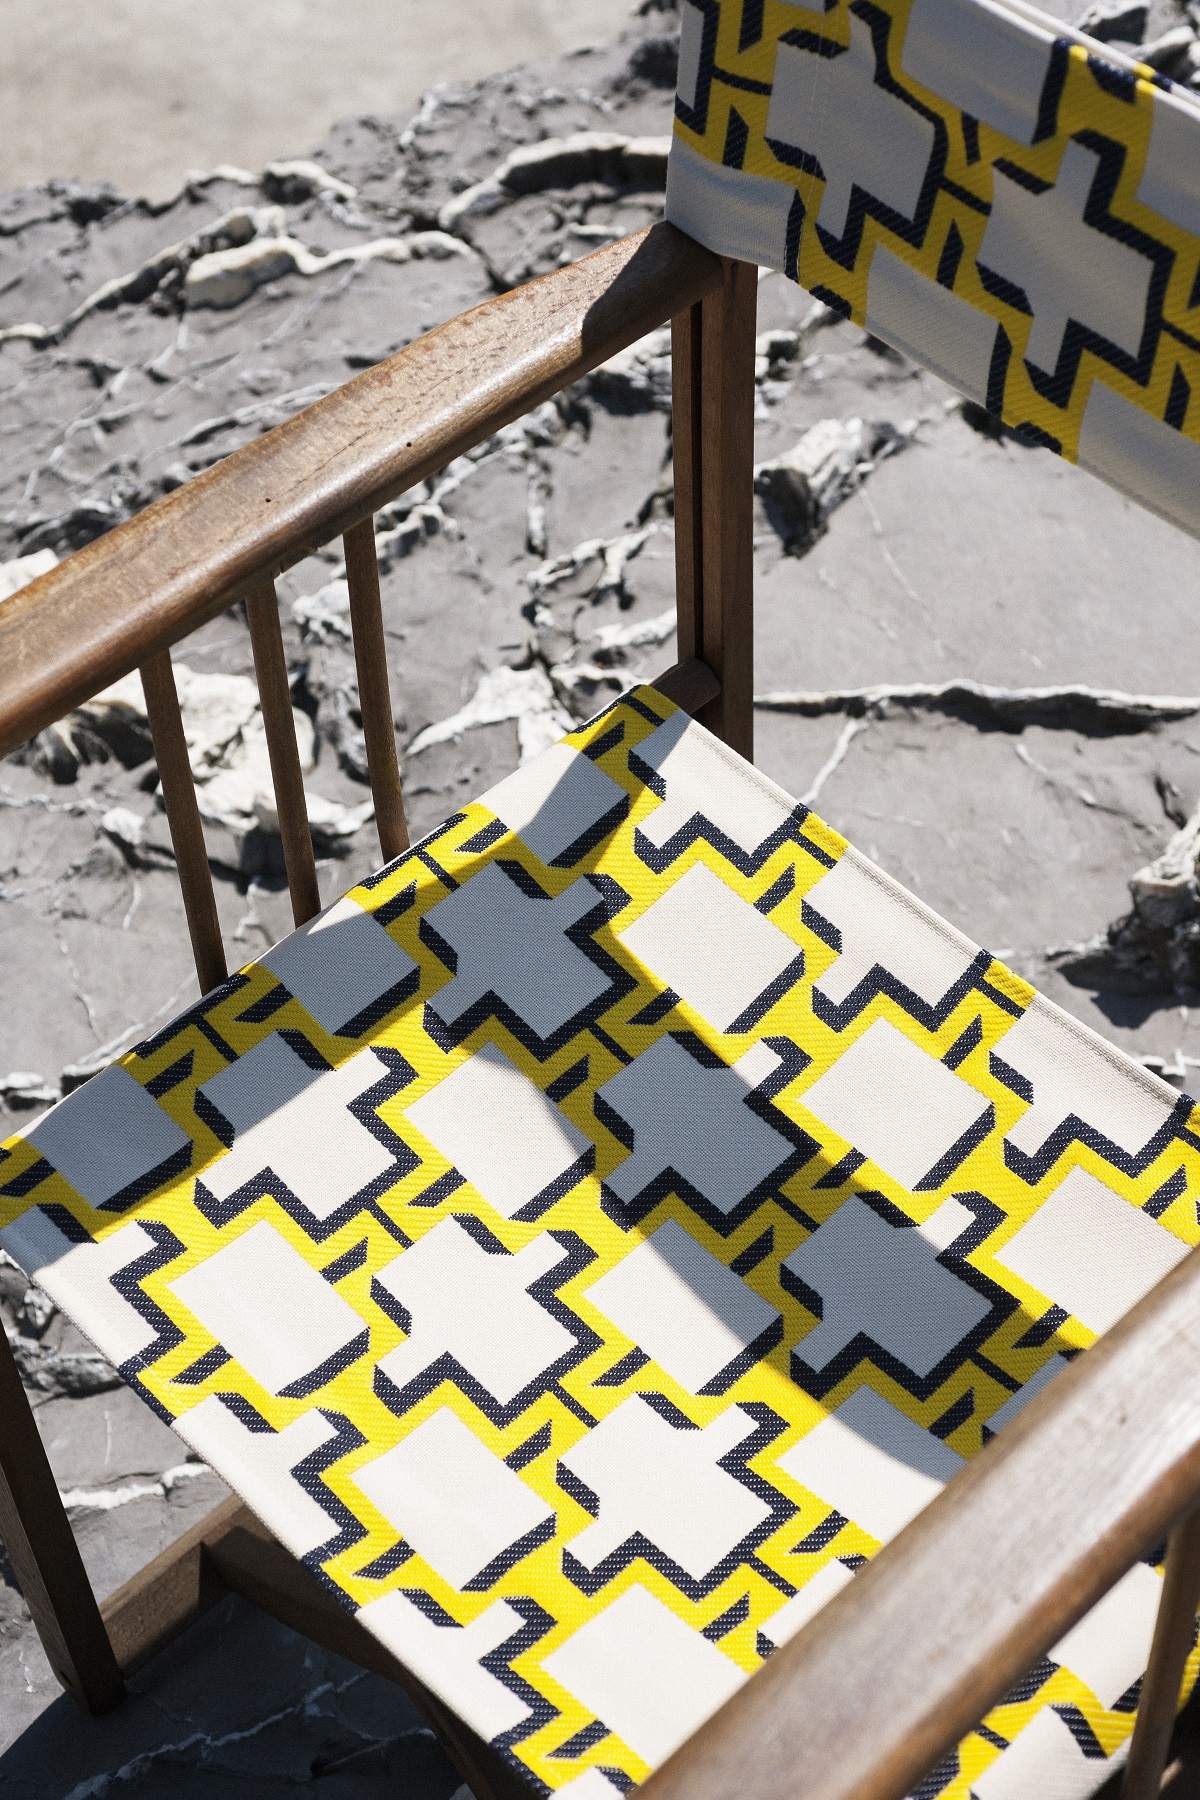 lozenge design in yellow and black fabric on seat of deckchair from Dedar Enjoyable Outdoors Collection